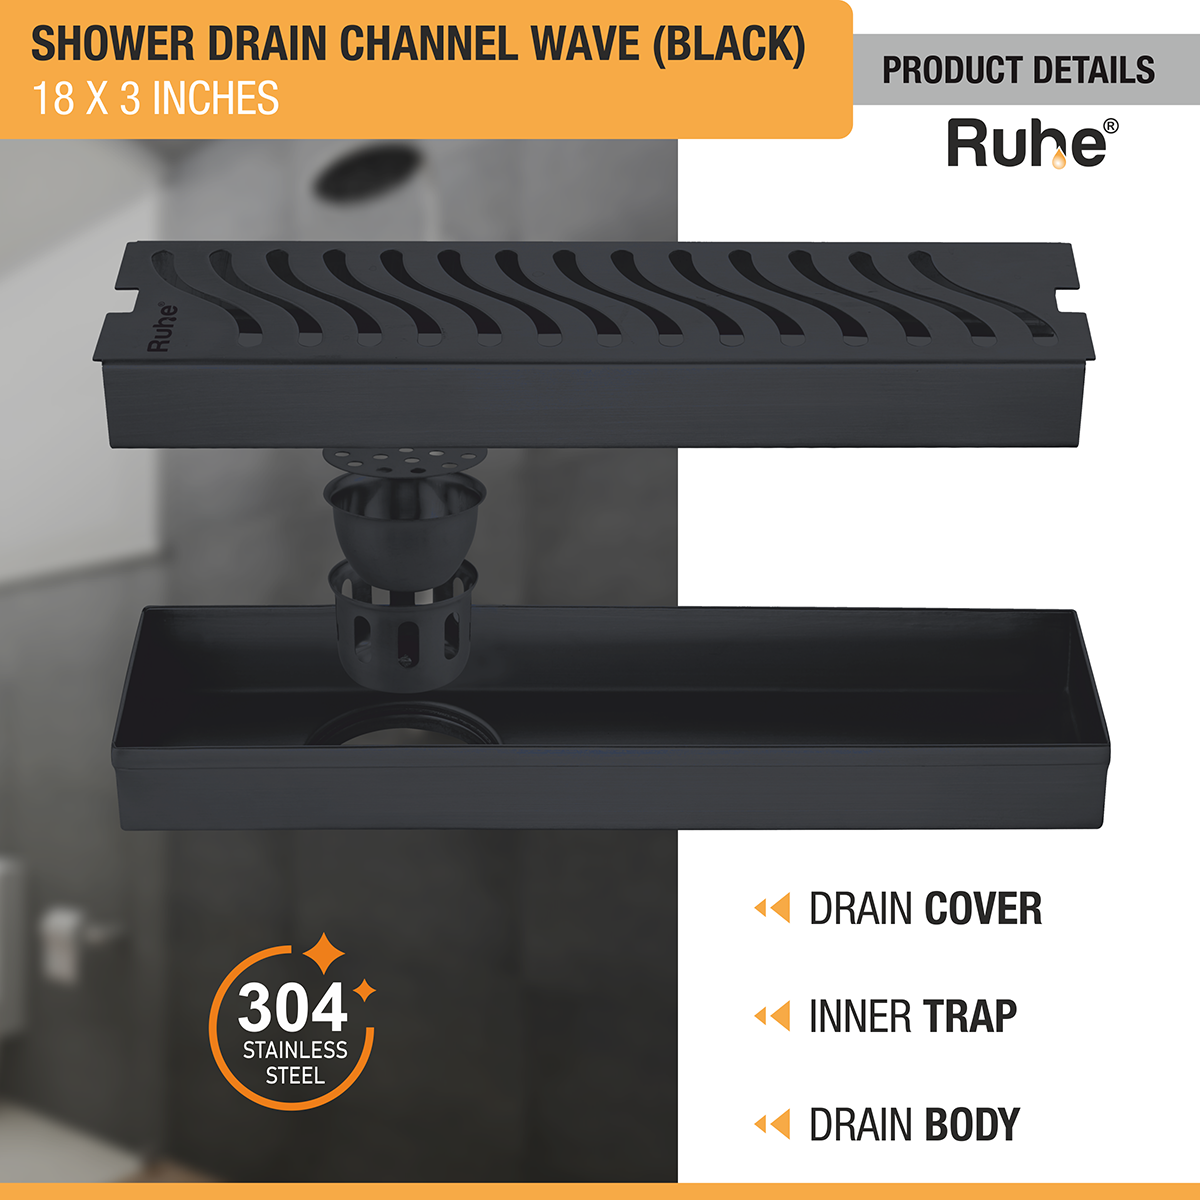 Wave Shower Drain Channel (18 x 3 Inches) Black PVD Coated with drain cover, inner insect trap, drain body